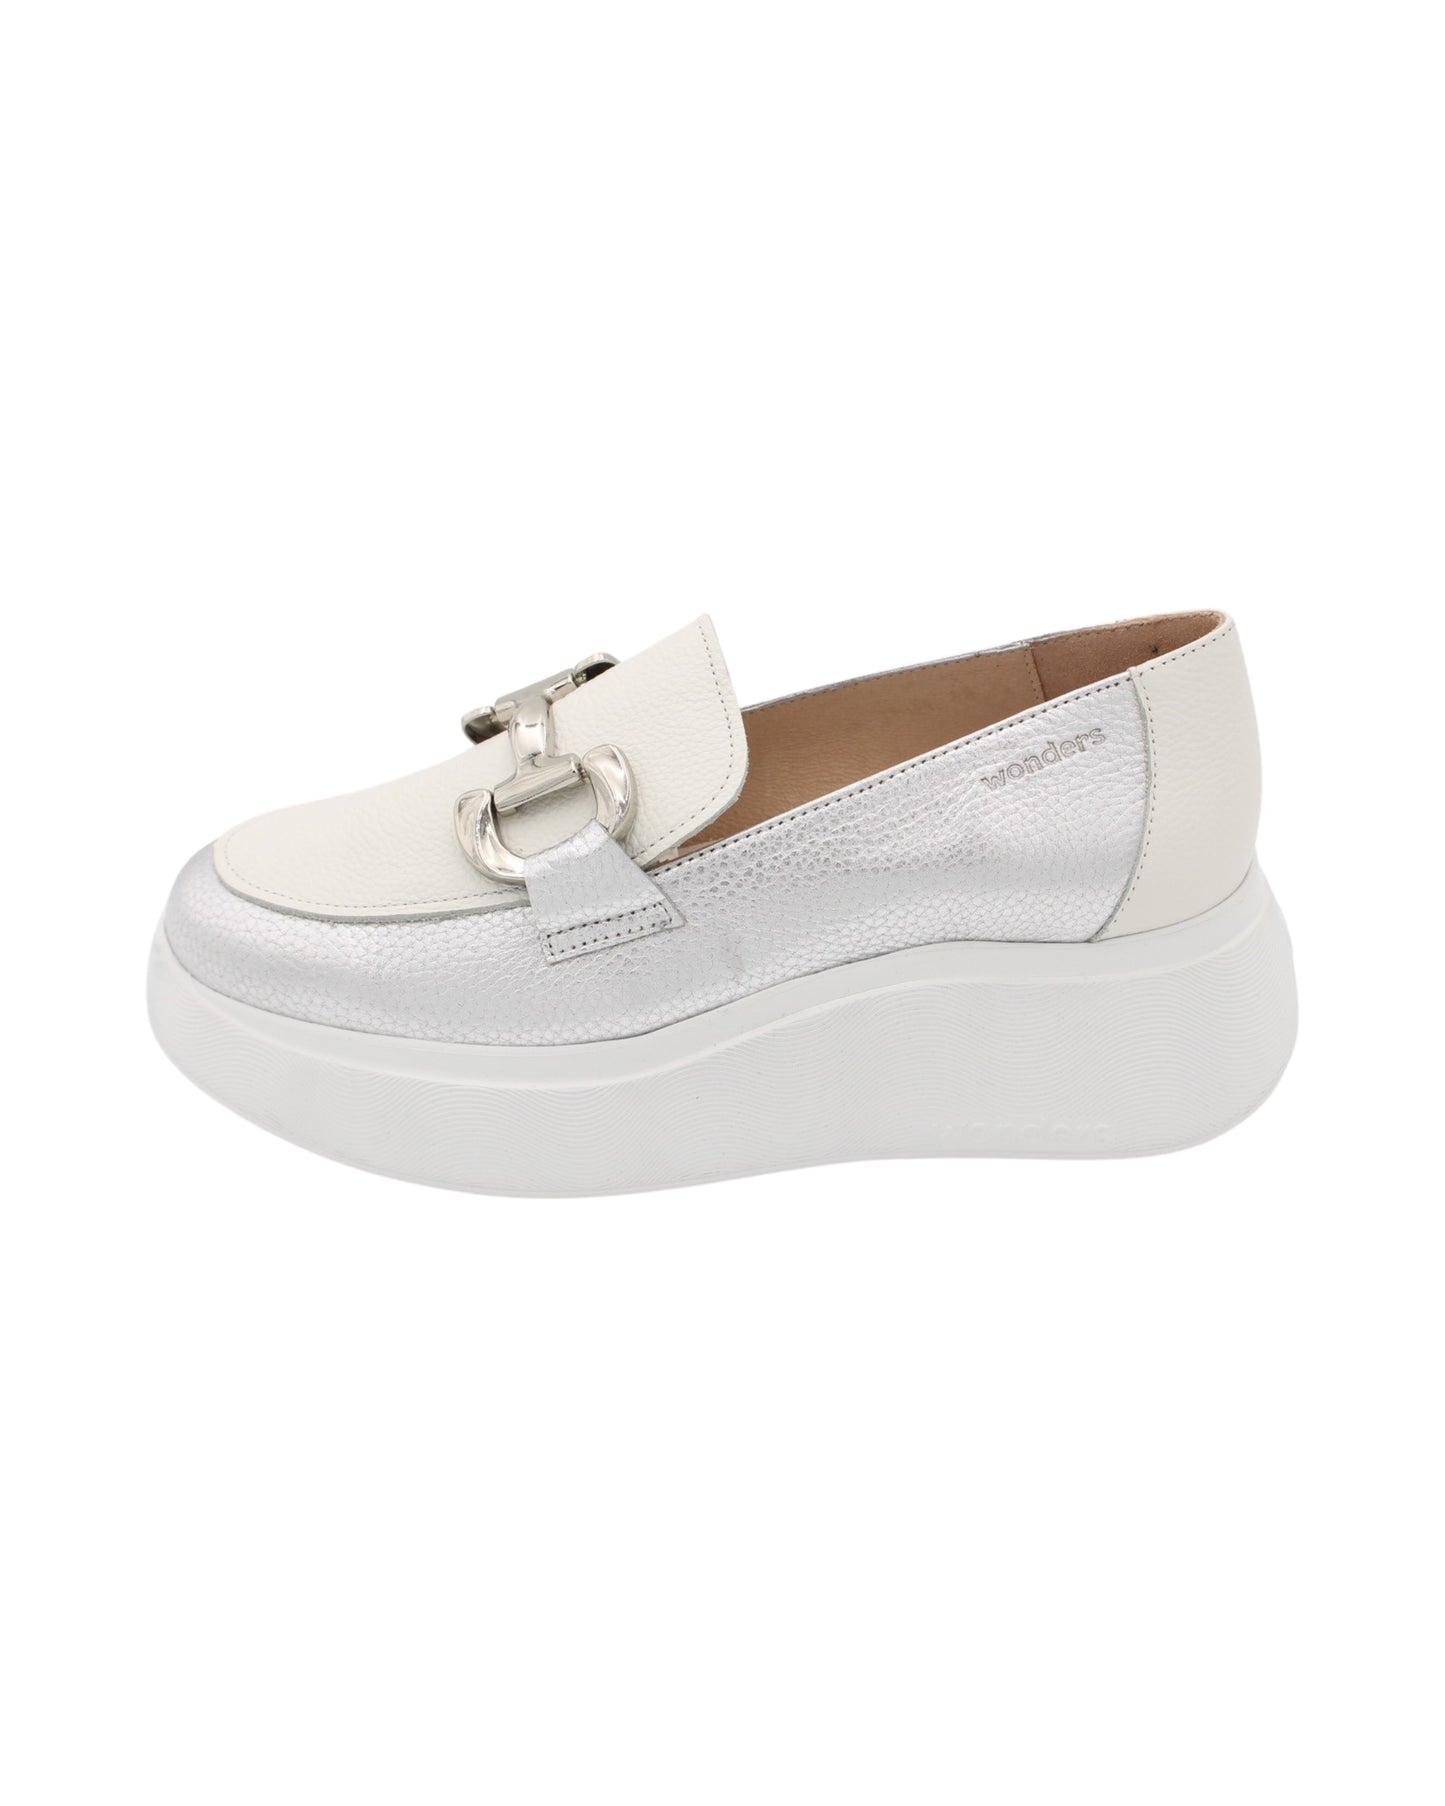 Wonders - Ladies Shoes Loafers White, Silver (1902)